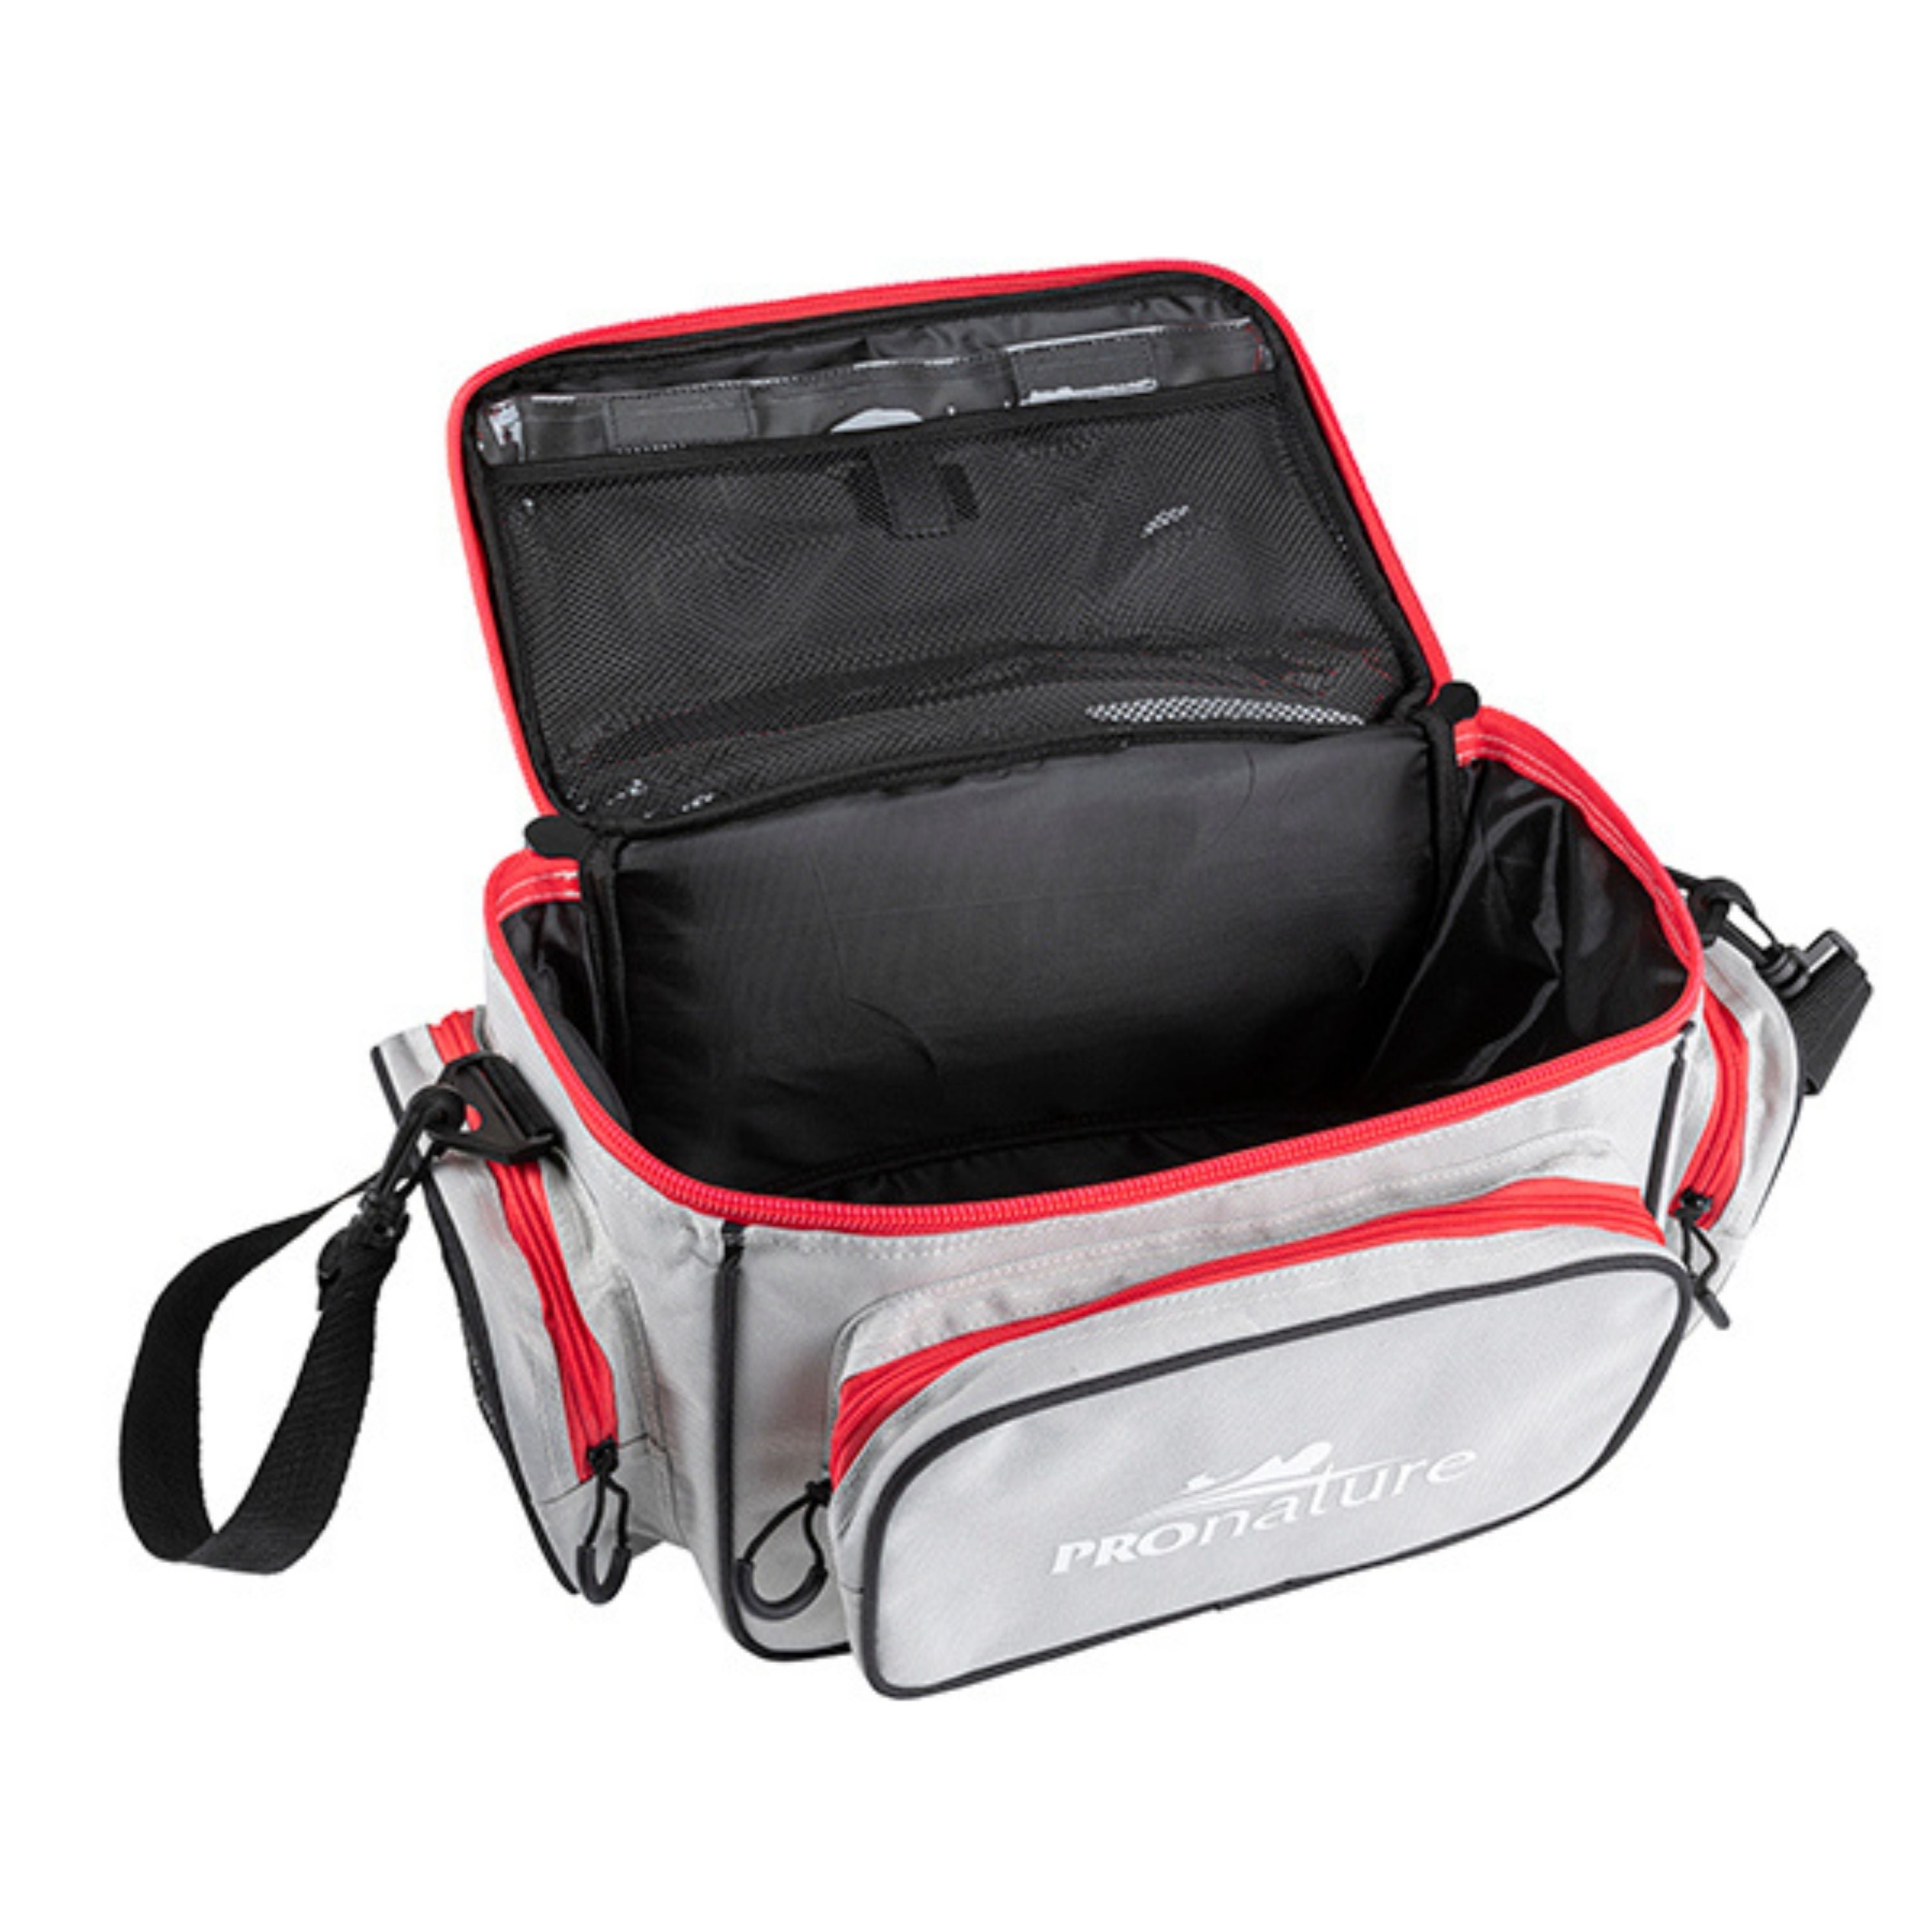 Small format fishing bag with tackle boxes — Groupe Pronature